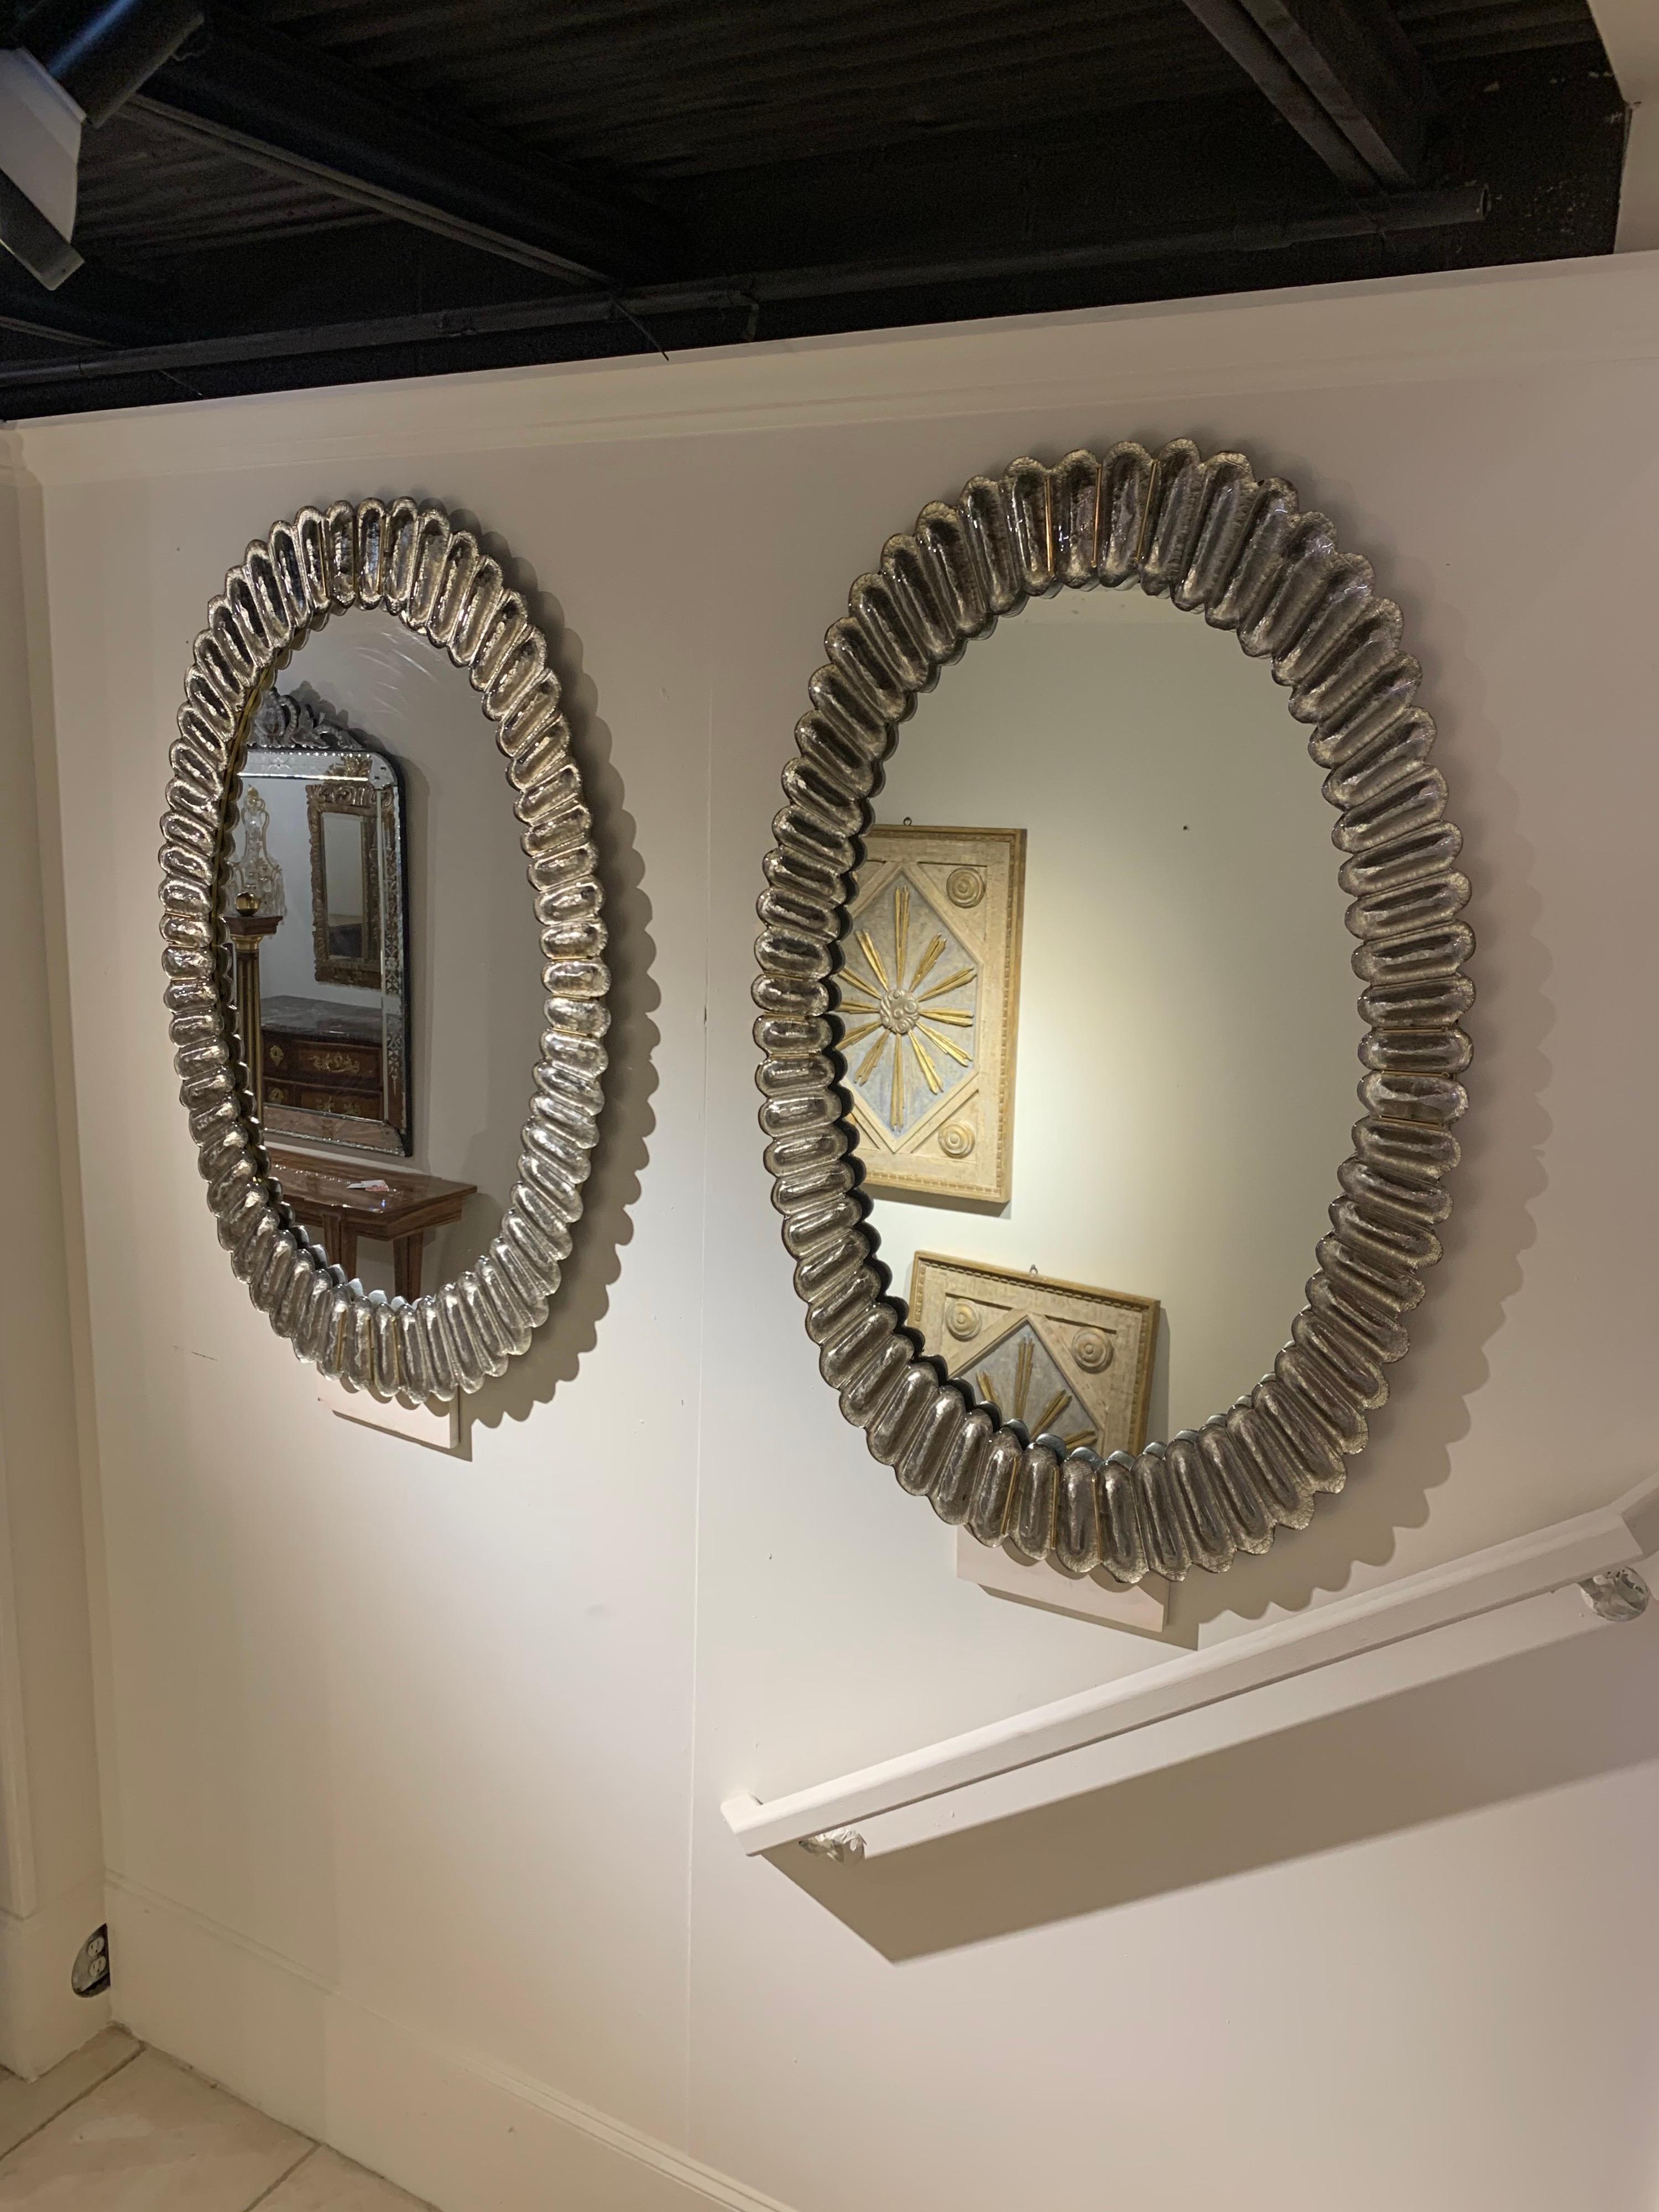 Very fine modern Murano glass oval mirrors with brass trim. Beautiful depth and color to this glass. A fabulous decorative element! Note: Price listed is per item.